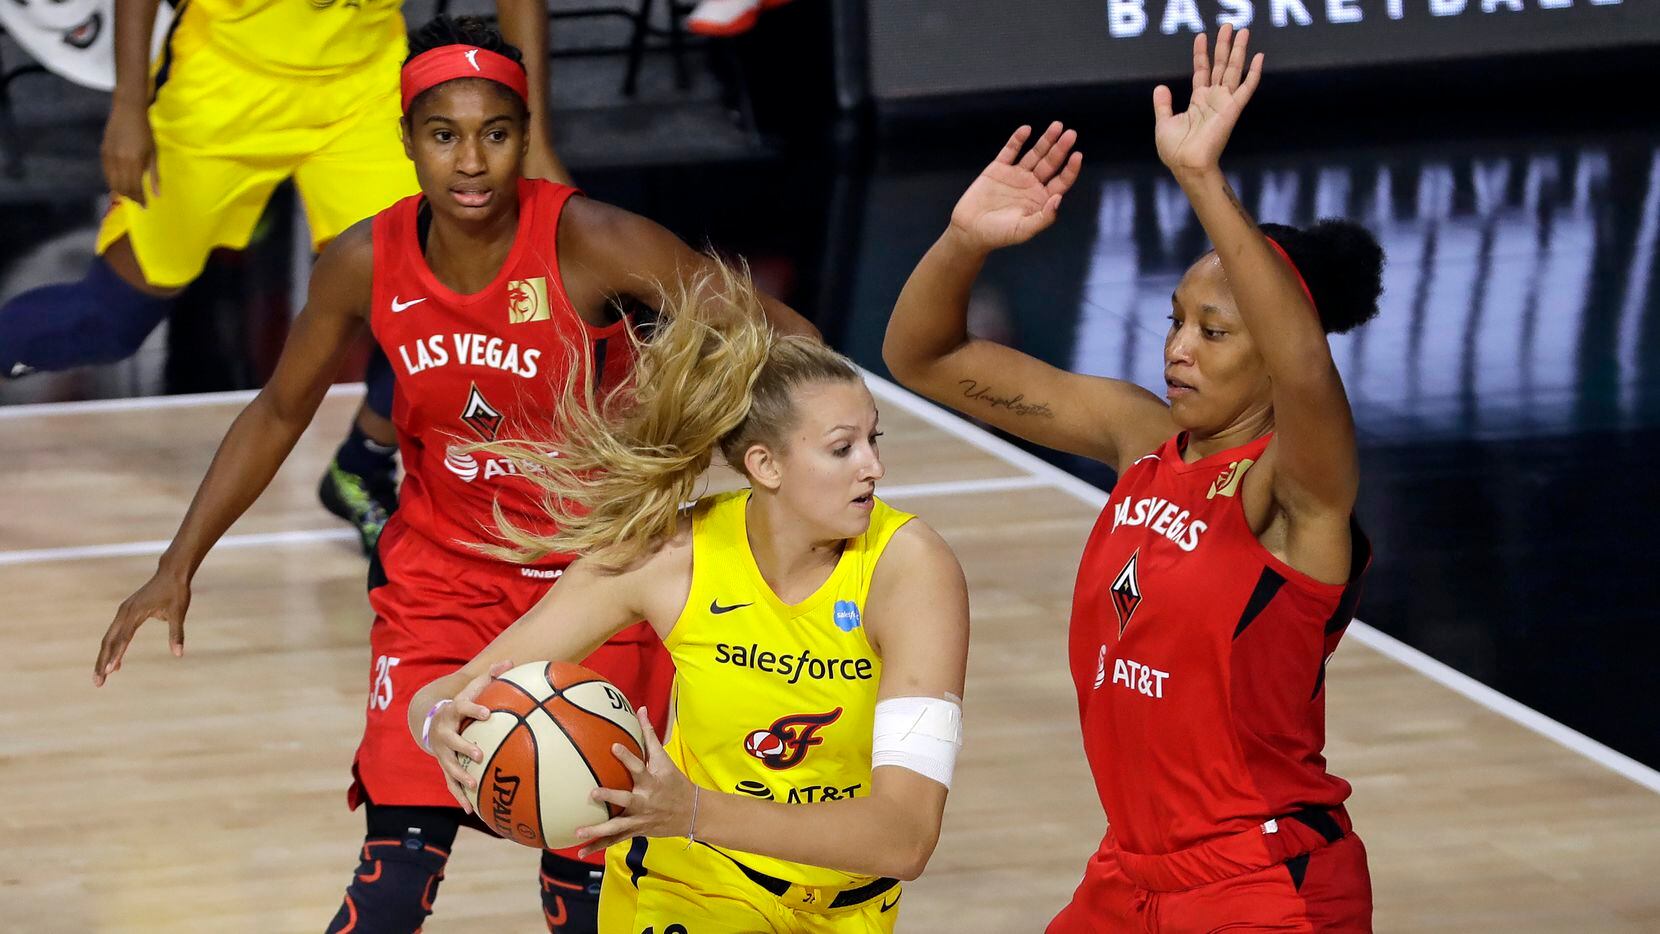 Indiana Fever forward Lauren Cox (13) drives into Las Vegas Aces center A'ja Wilson (22) and forward Angel McCoughtry (35) during the second half of a WNBA basketball game Tuesday, Aug. 11, 2020, in Bradenton, Fla.